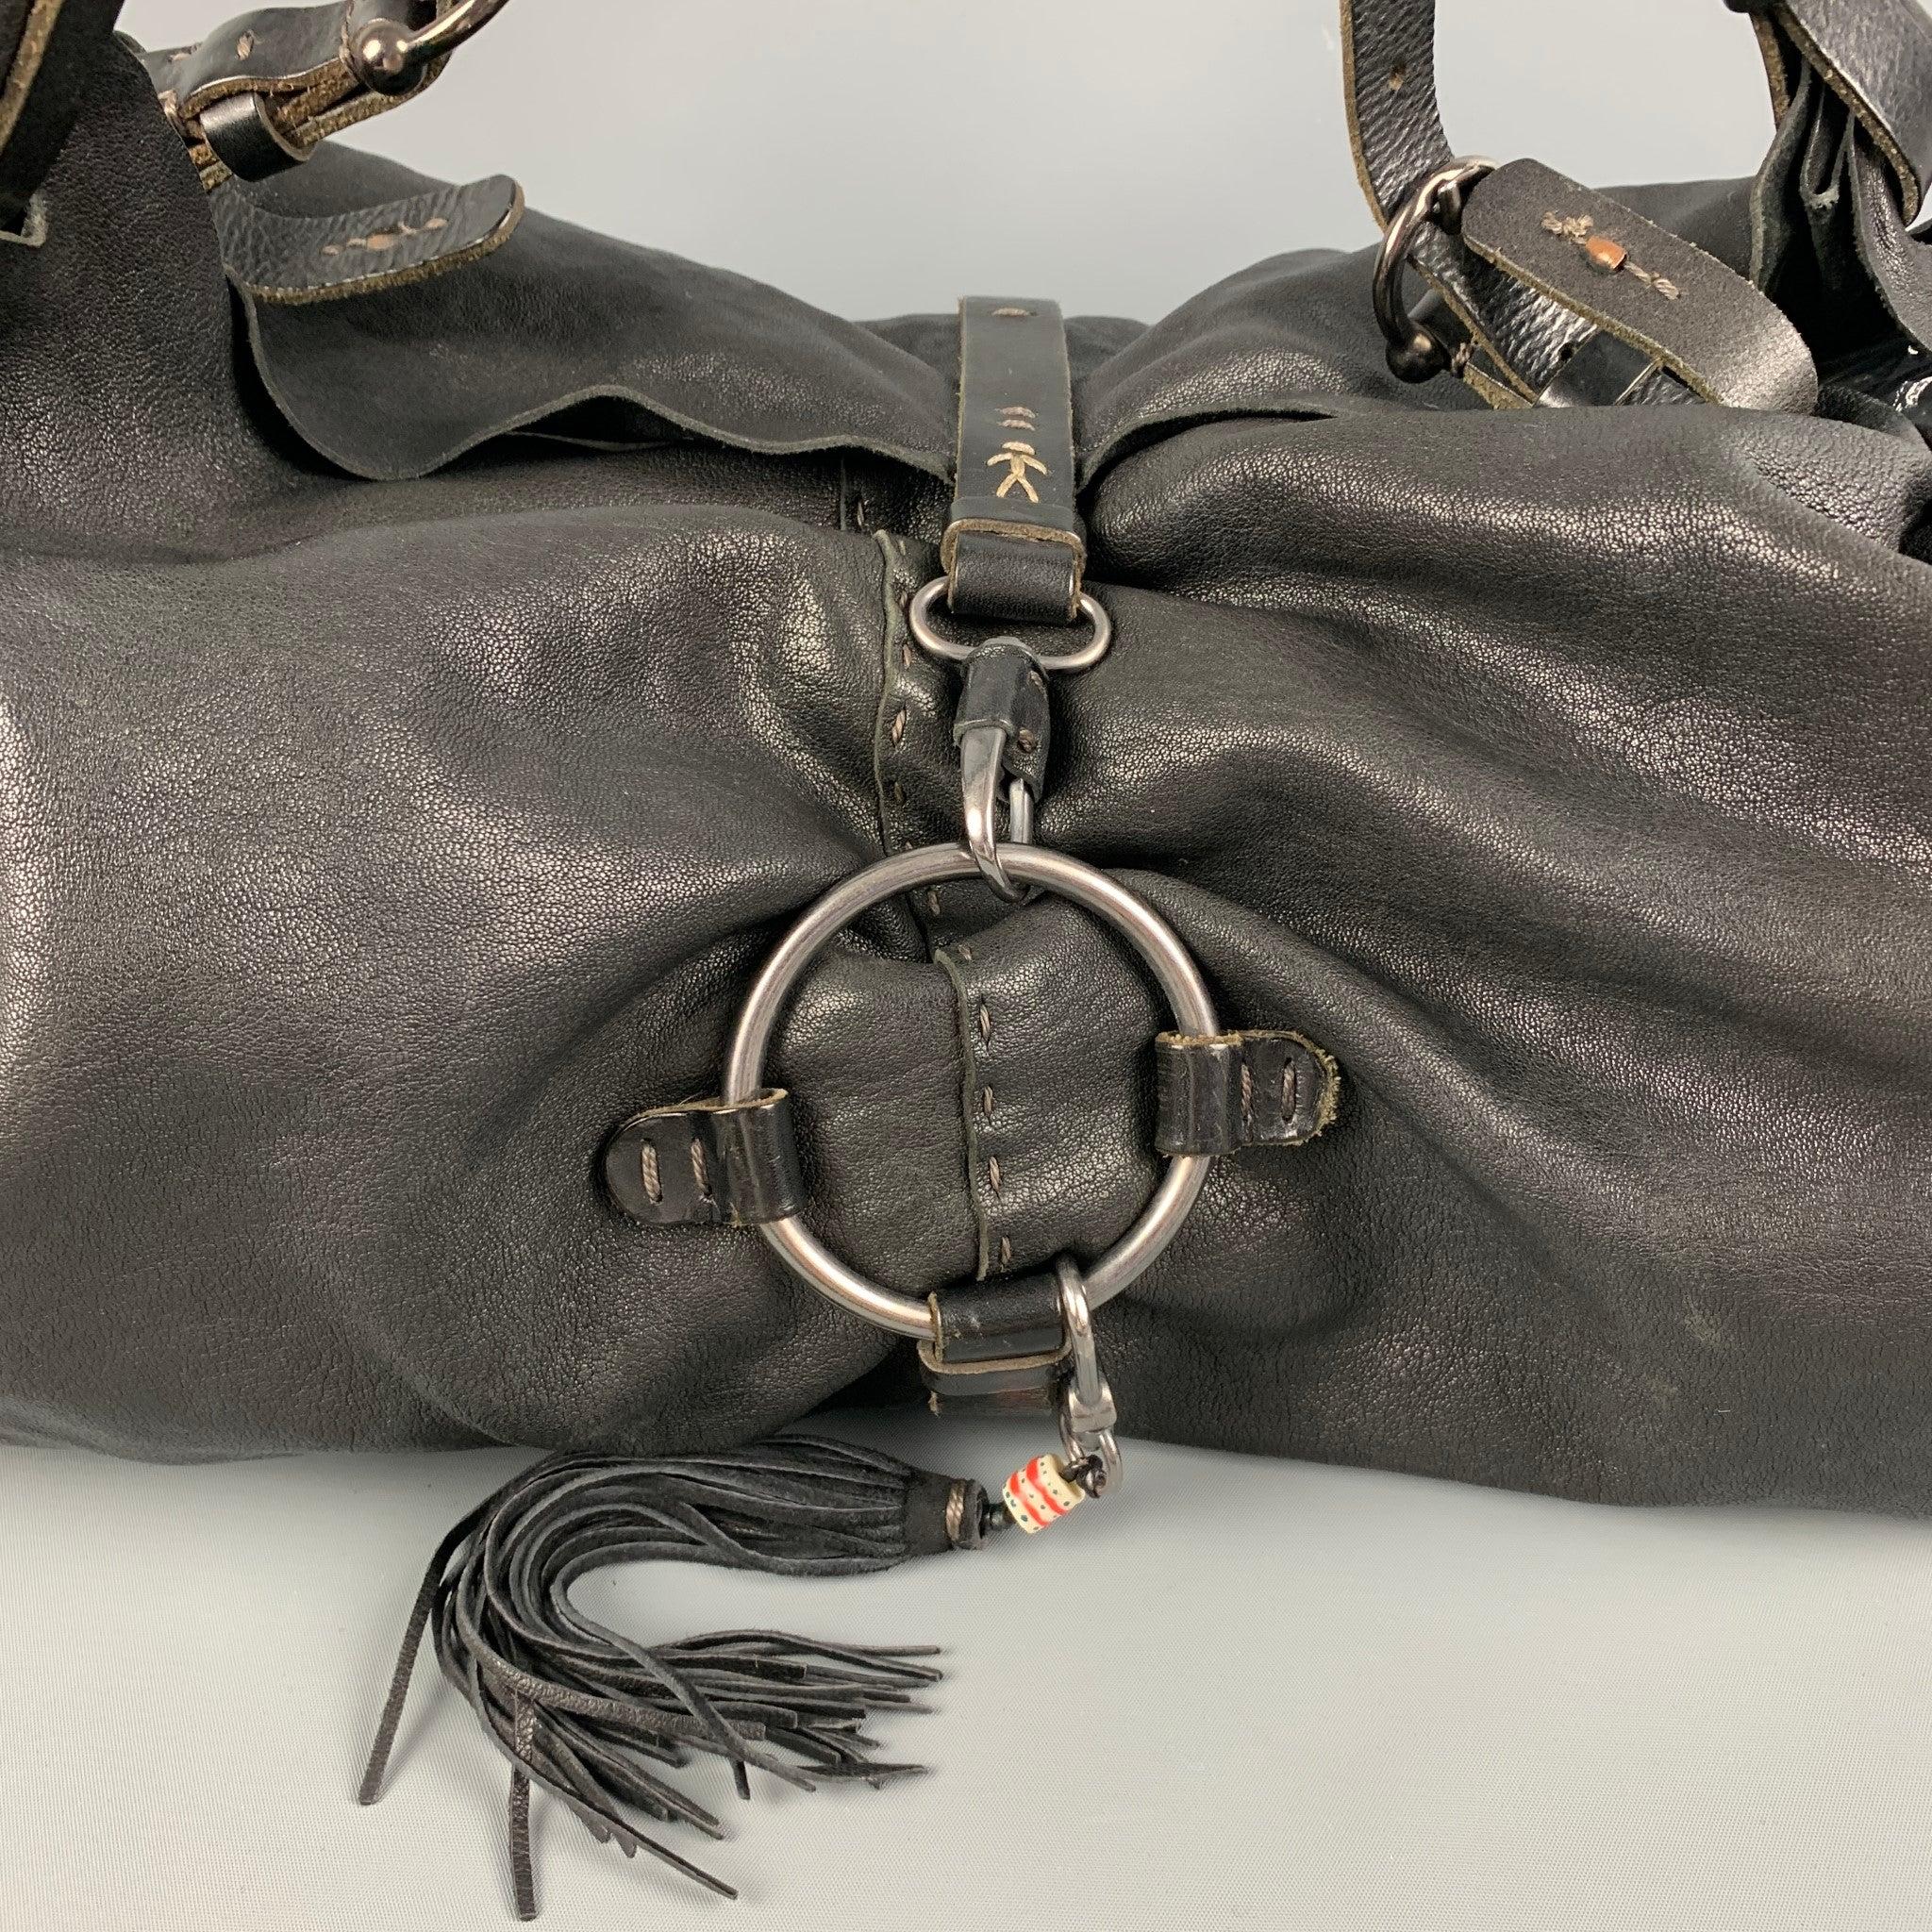 HENRY BEGUELIN bag comes in a black distressed leather featuring top handles, wallet attachment, silver ton hardware, and a front clasp closure. Includes tags & dust bag. Very Good Pre-Owned Condition. 

Measurements: 
  Length: 21 inches  Width: 10